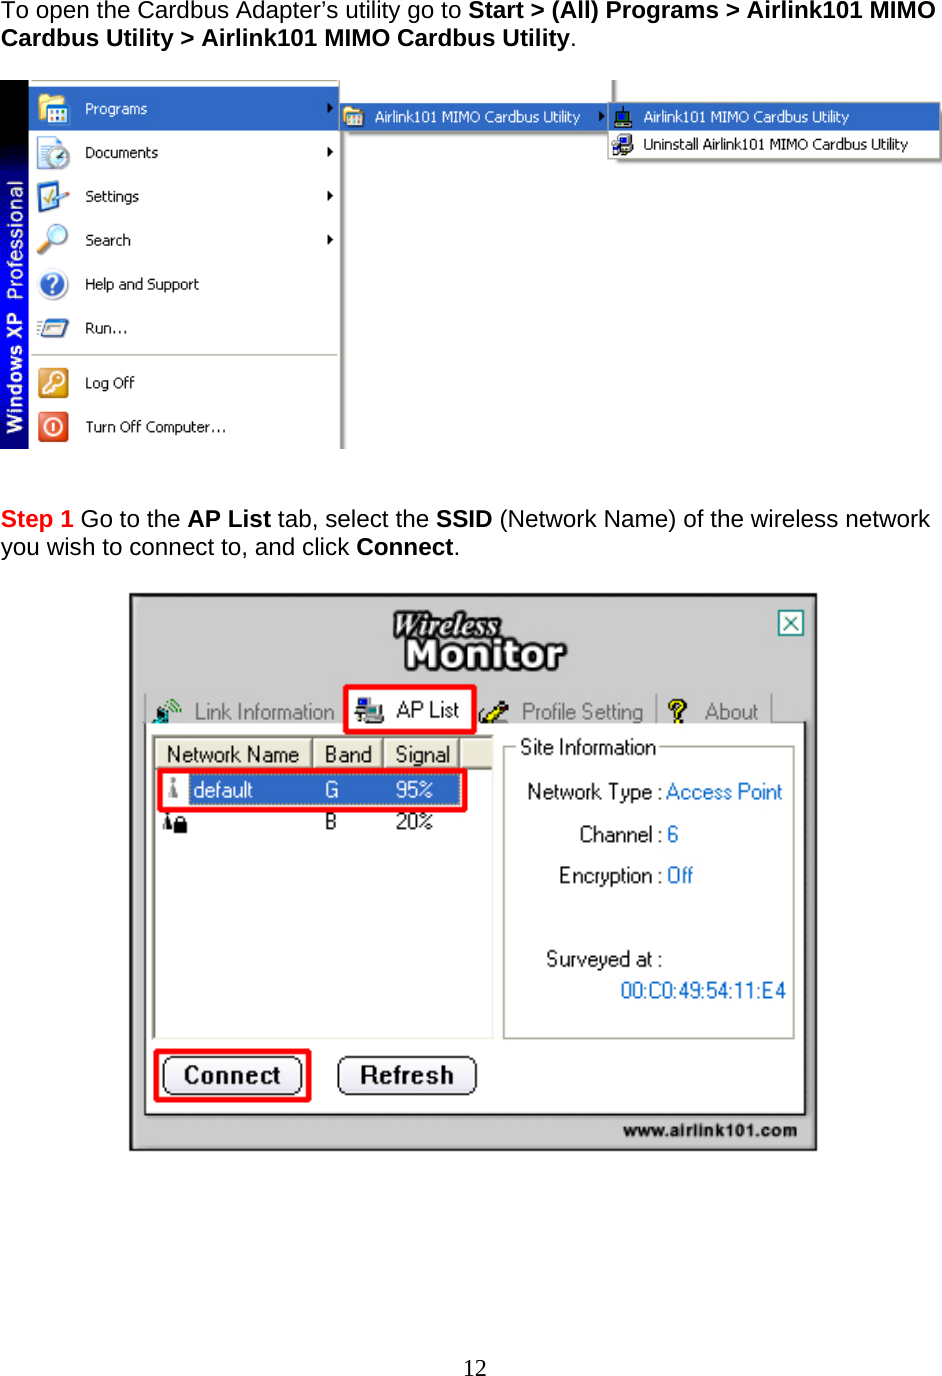 12 To open the Cardbus Adapter’s utility go to Start &gt; (All) Programs &gt; Airlink101 MIMO Cardbus Utility &gt; Airlink101 MIMO Cardbus Utility.     Step 1 Go to the AP List tab, select the SSID (Network Name) of the wireless network you wish to connect to, and click Connect.       